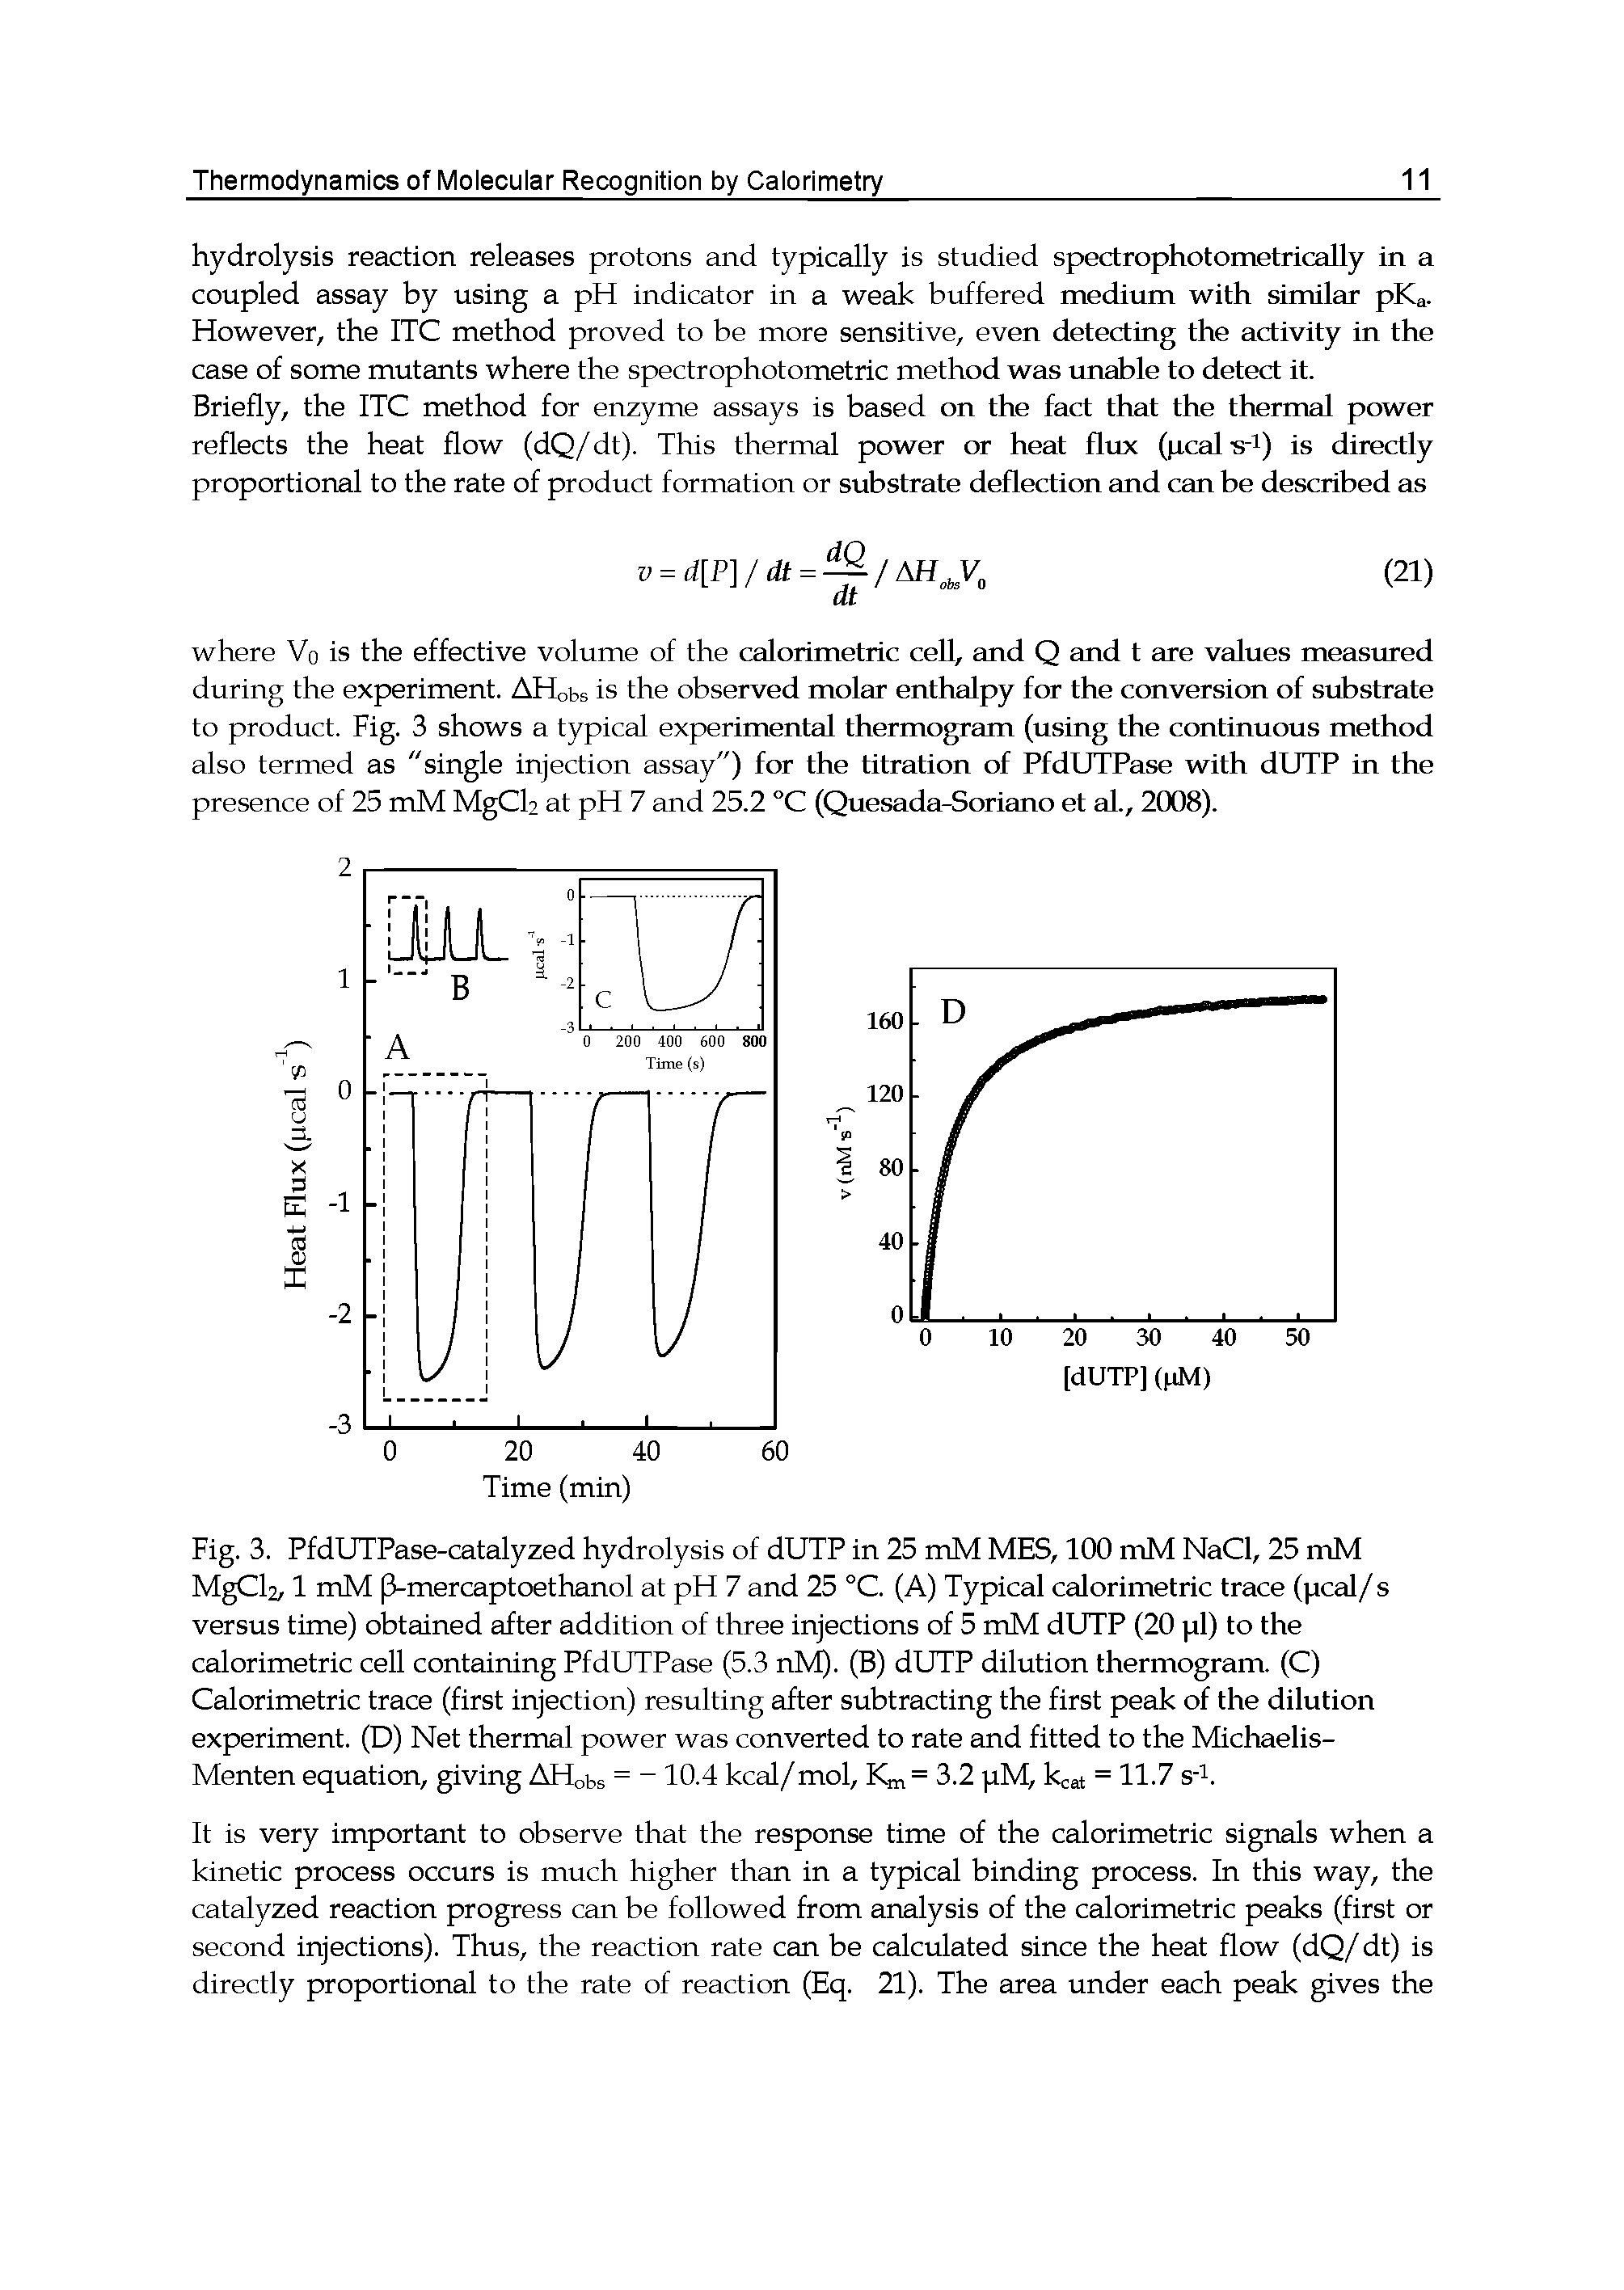 Fig. 3. PfdUTPase-catalyzed hydrolysis of dUTP in 25 mM MES, 100 mM NaCl, 25 mM MgCl2,1 mM P-mercaptoethanol at pH 7 and 25 °C. (A) Typrical calorimetric trace (peal/ s versus time) obtained after addition of three injections of 5 mM dUTP (20 pi) to the calorimetric cell containing PfdUTPase (5.3 nM). (B) dUTP dilution thermogram. (C) Calorimetric trace (first injection) resulting after subtracting the first peak of the dilution experiment. (D) Net thermal power was converted to rate and fitted to the Michaelis-Menten equation, giving AHobs = 10.4 kcal/mol, = 3.2 pM, kcai = 11.7 s-i.